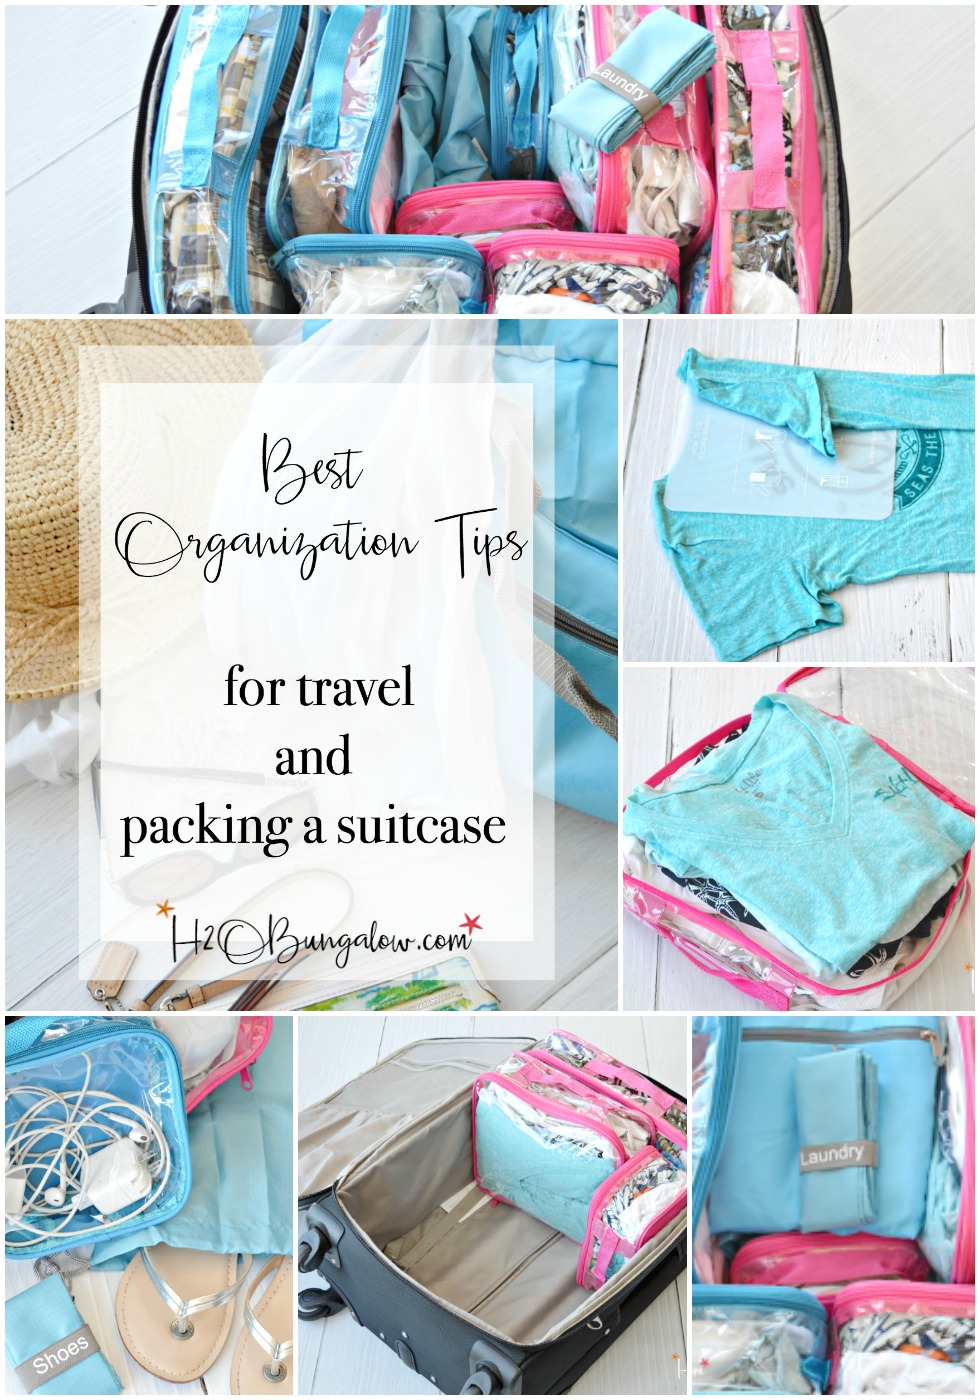 Best organization tips for travel and packing a suitcase with easy to follow checklist. EZPacking cubes is the best and easiest travel organization method to follow for the single traveler or an entire family. H2OBungalow 